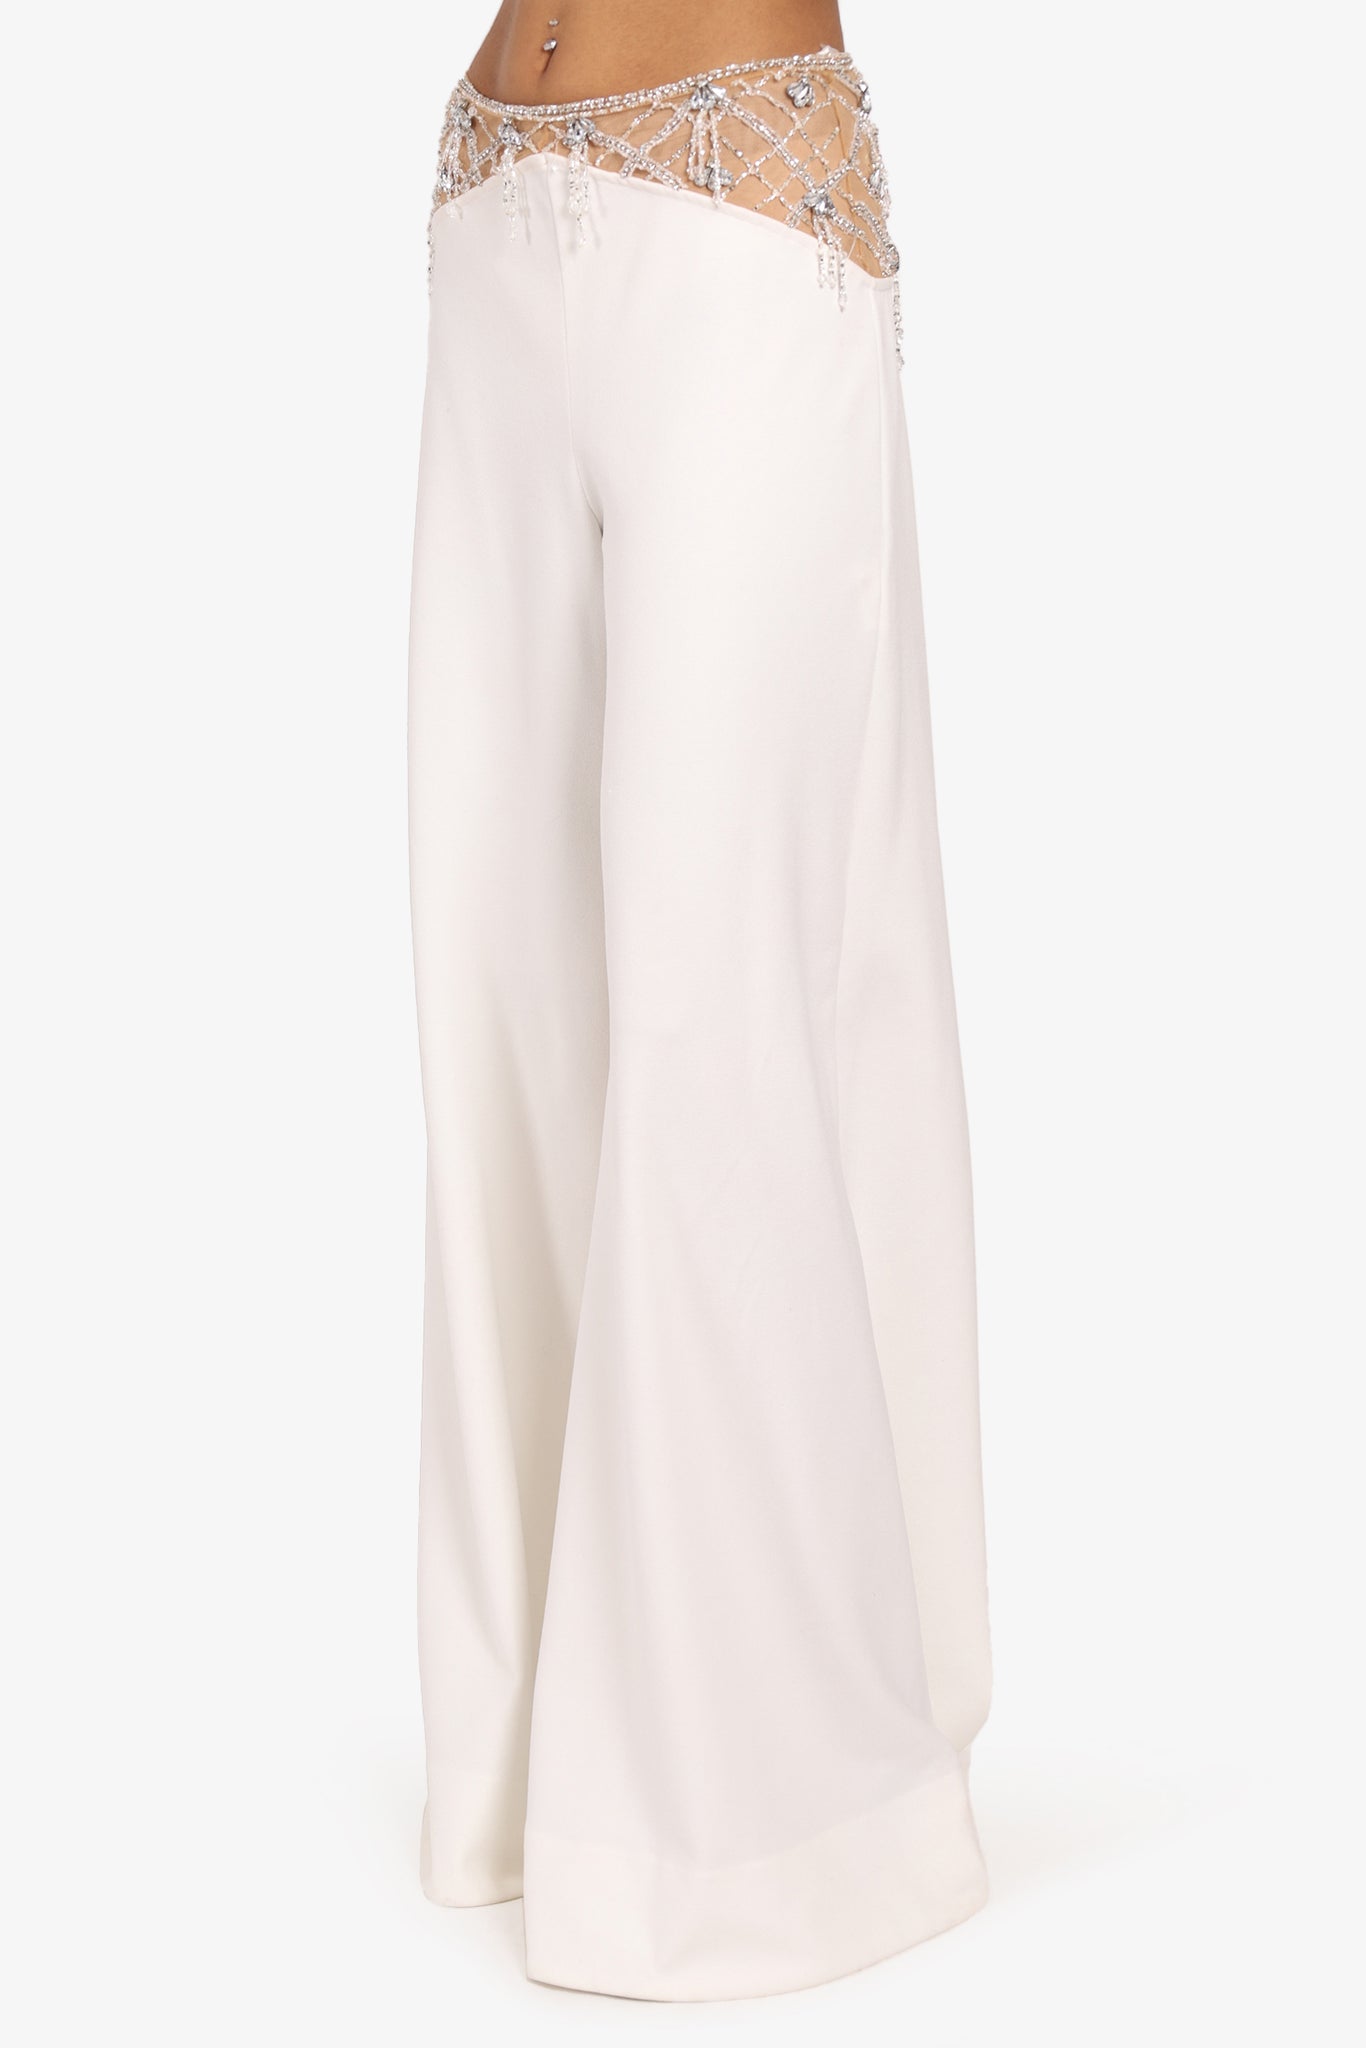 Patbo White Crystal Embellished Wide Leg Pants Size 6 – Mine & Yours